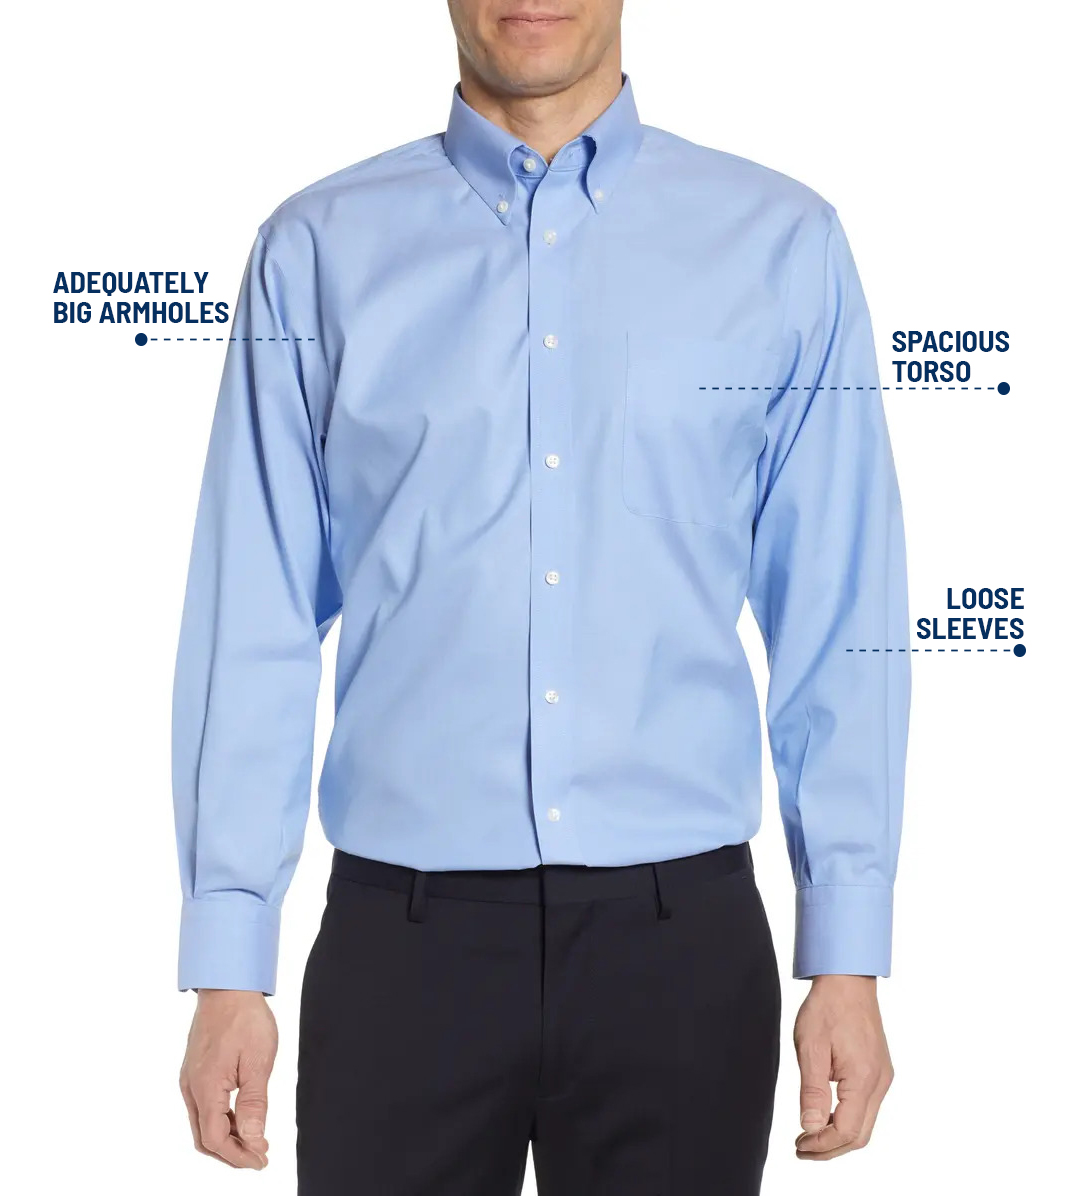 Features of a classic fit dress shirt